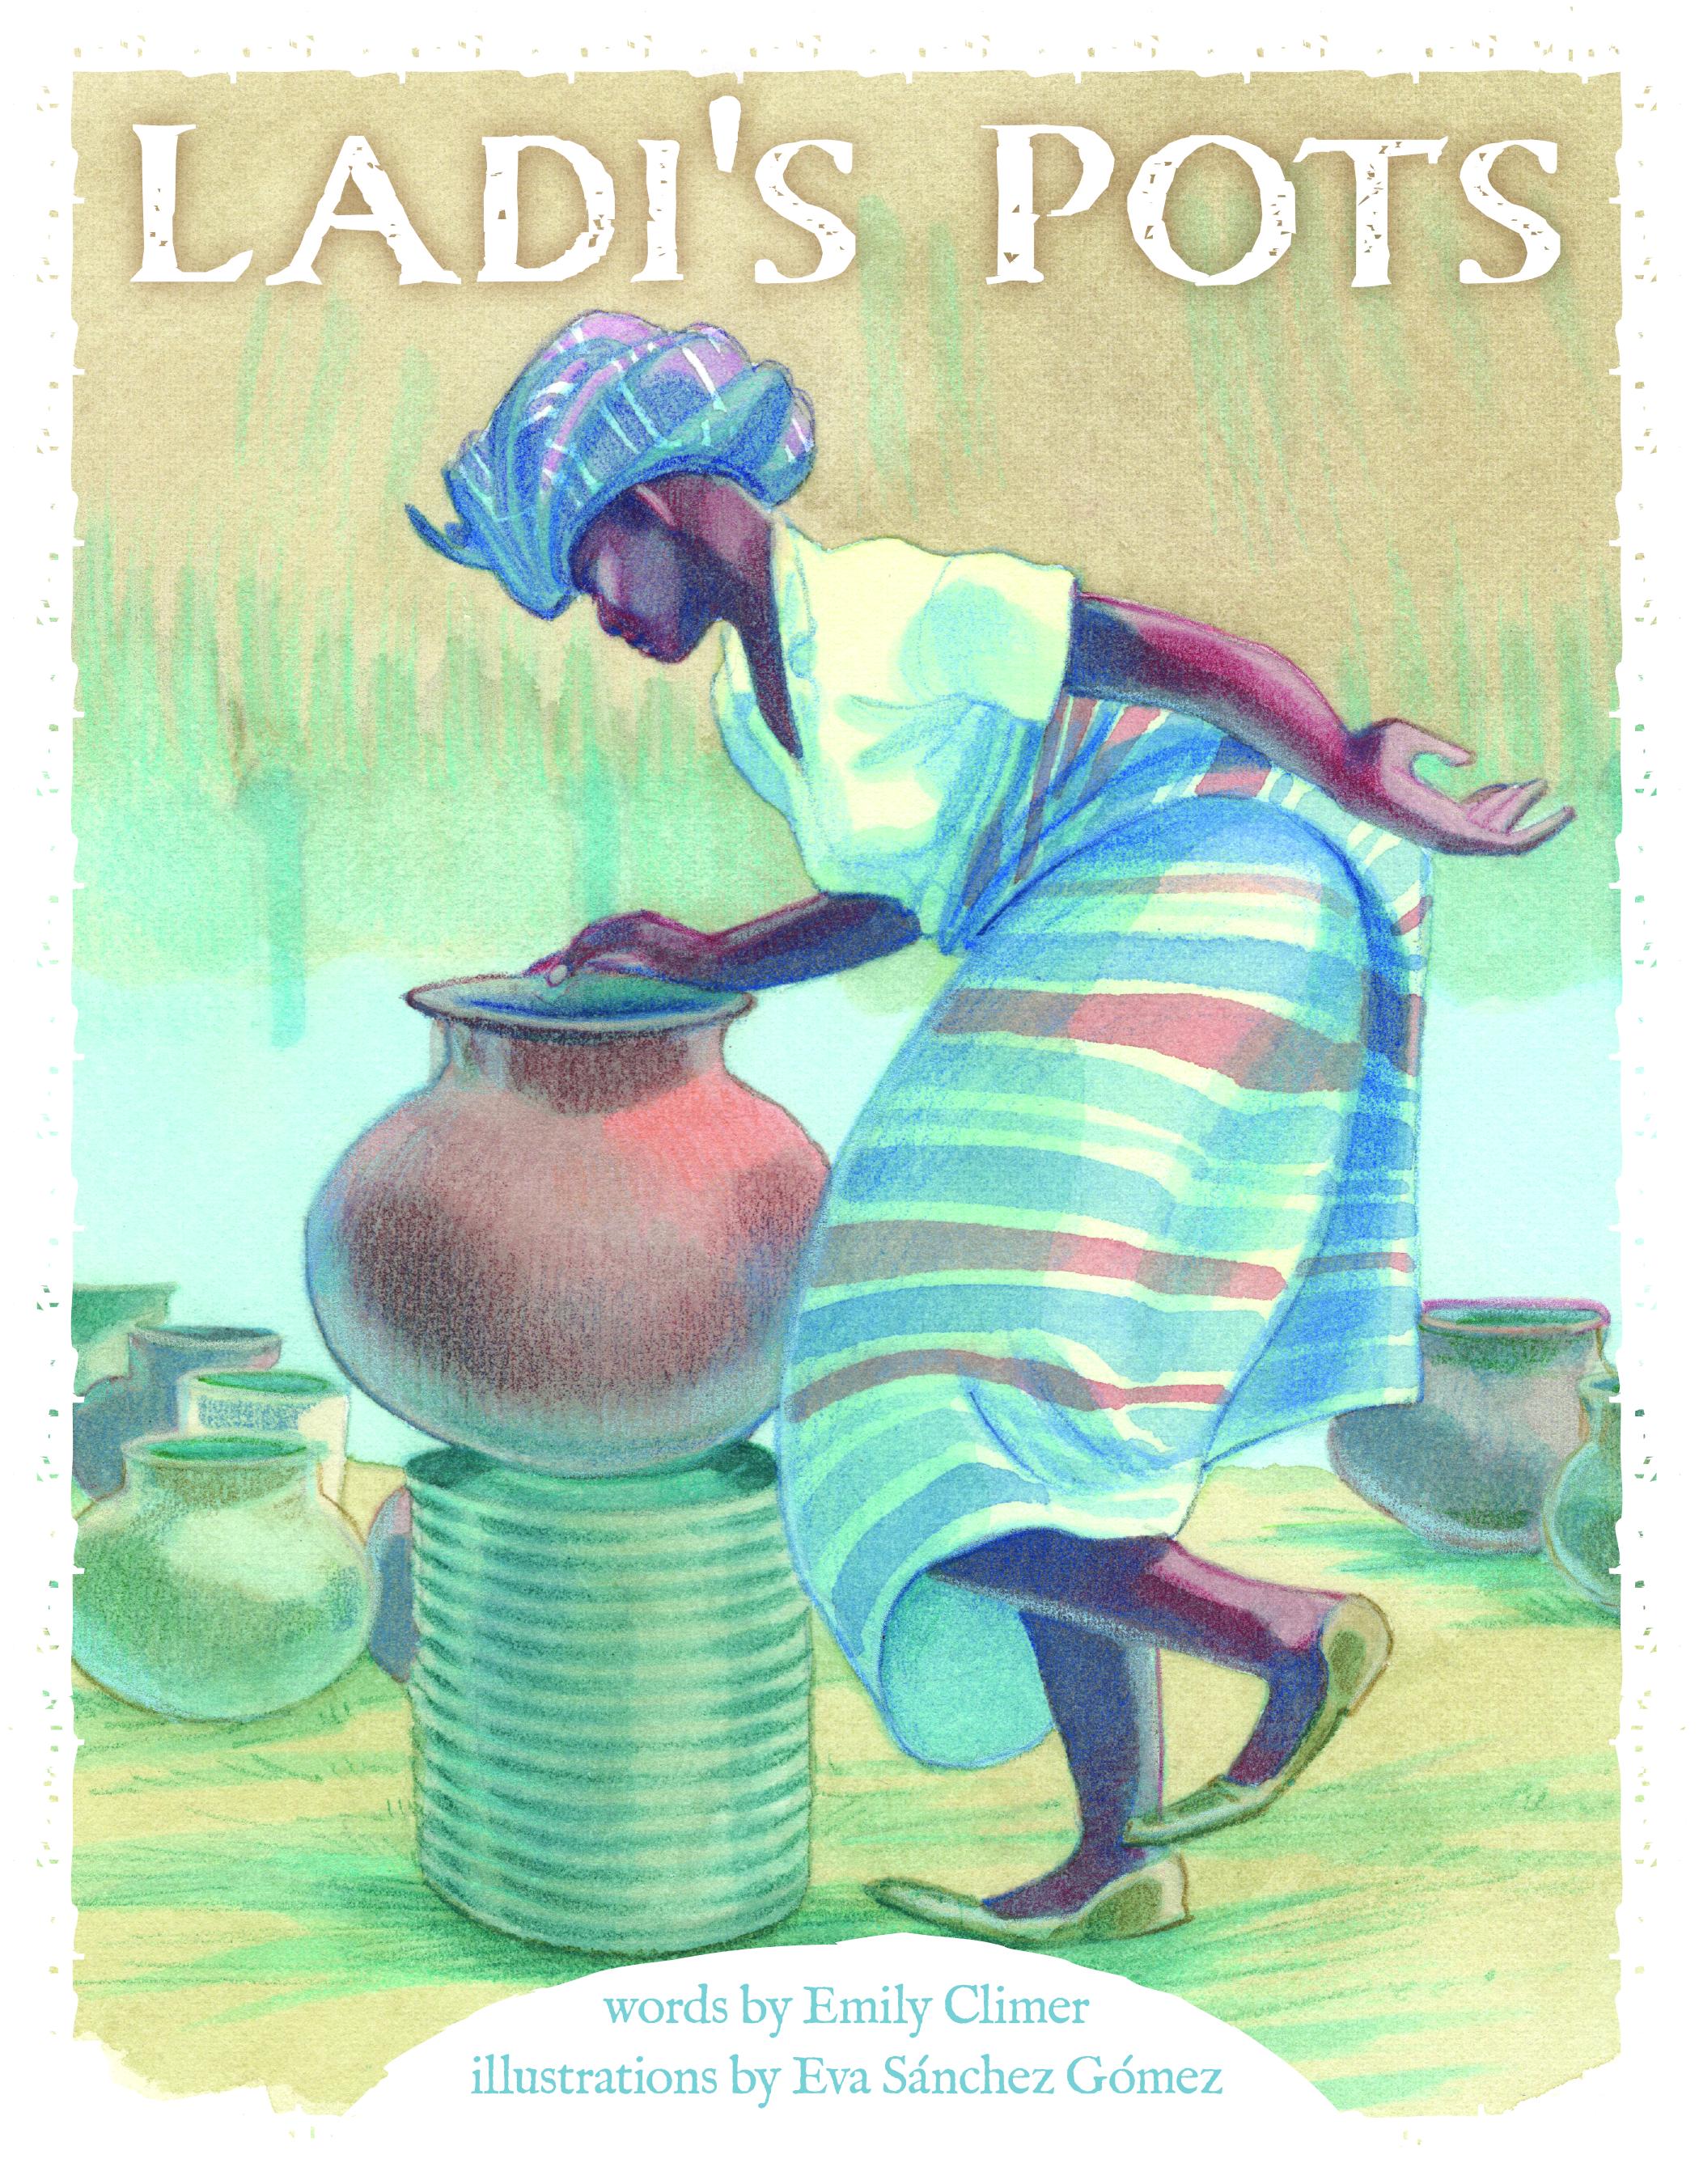 Ladi's Pots book cover showing a woman dancing with a round clay pot.